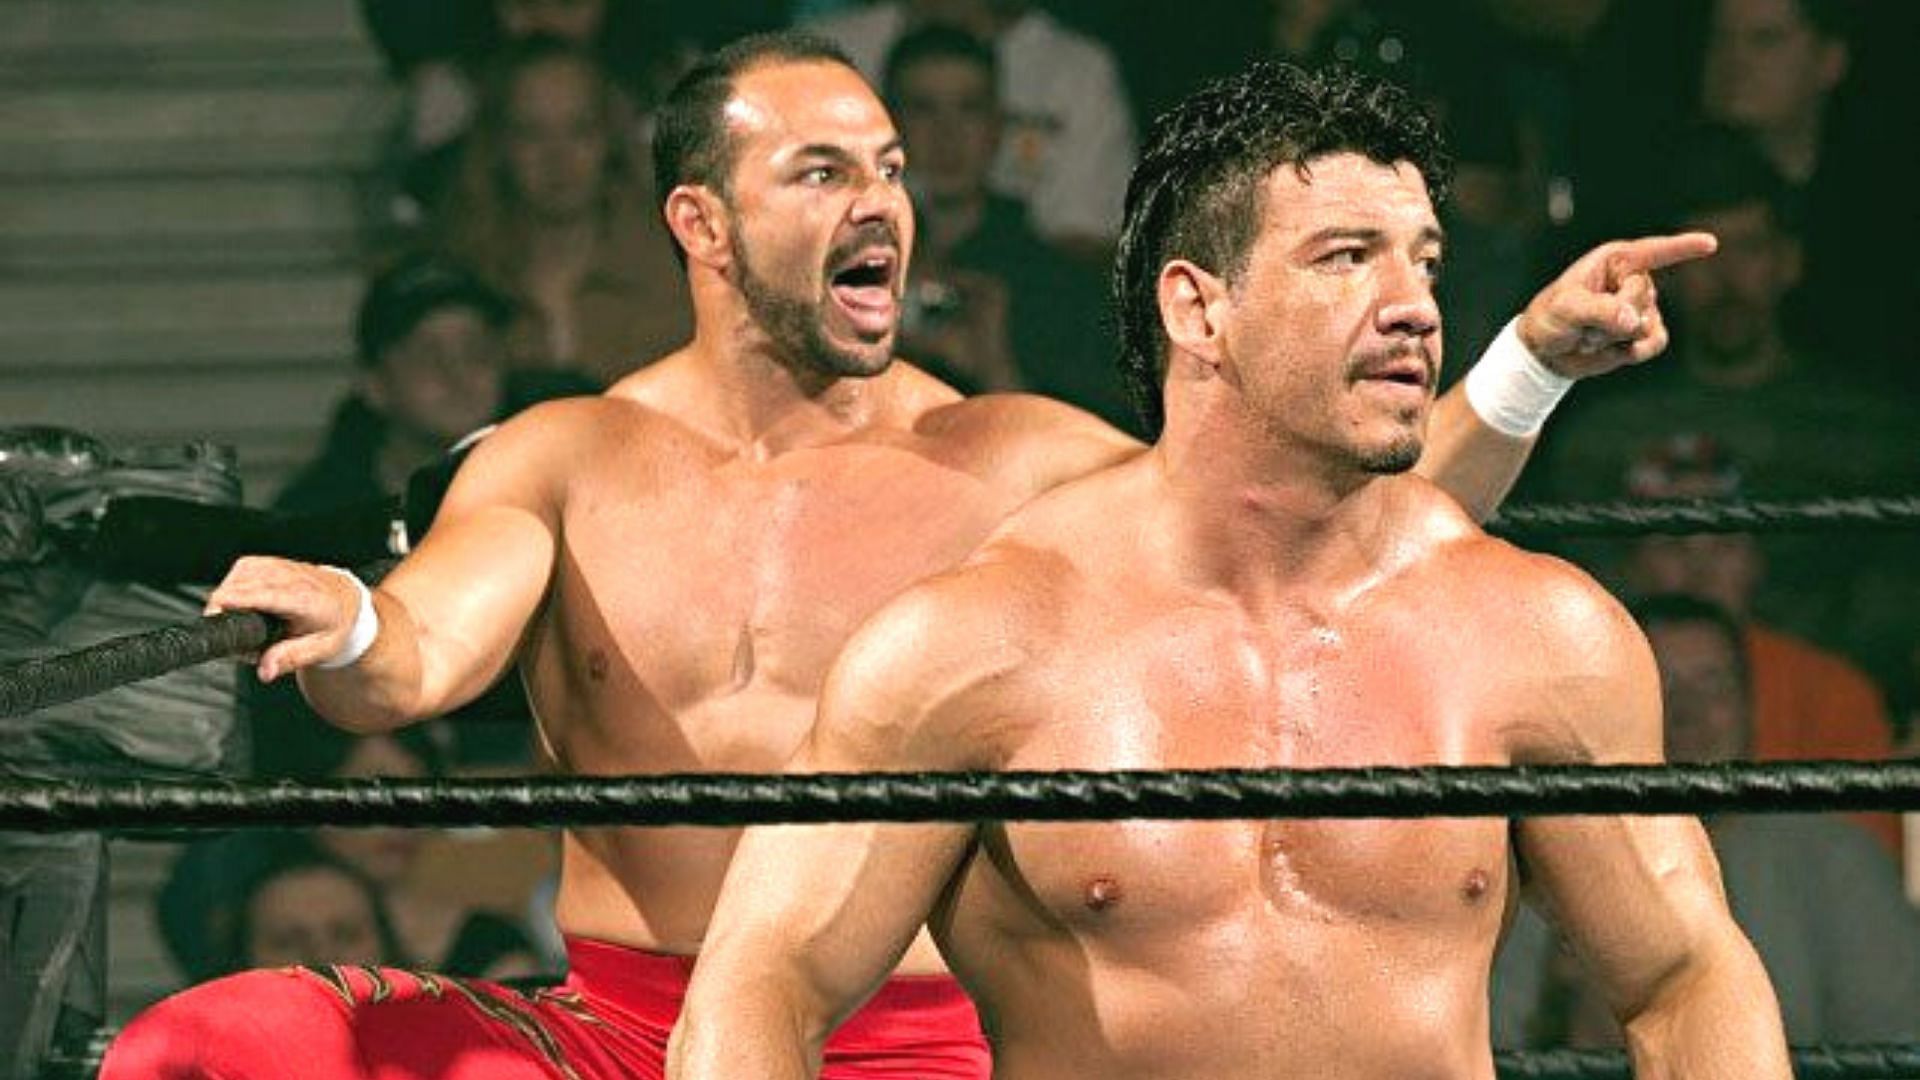 Chavo and Eddie Guerrero, collectively known as Los Guerreros in WCW and WWE.